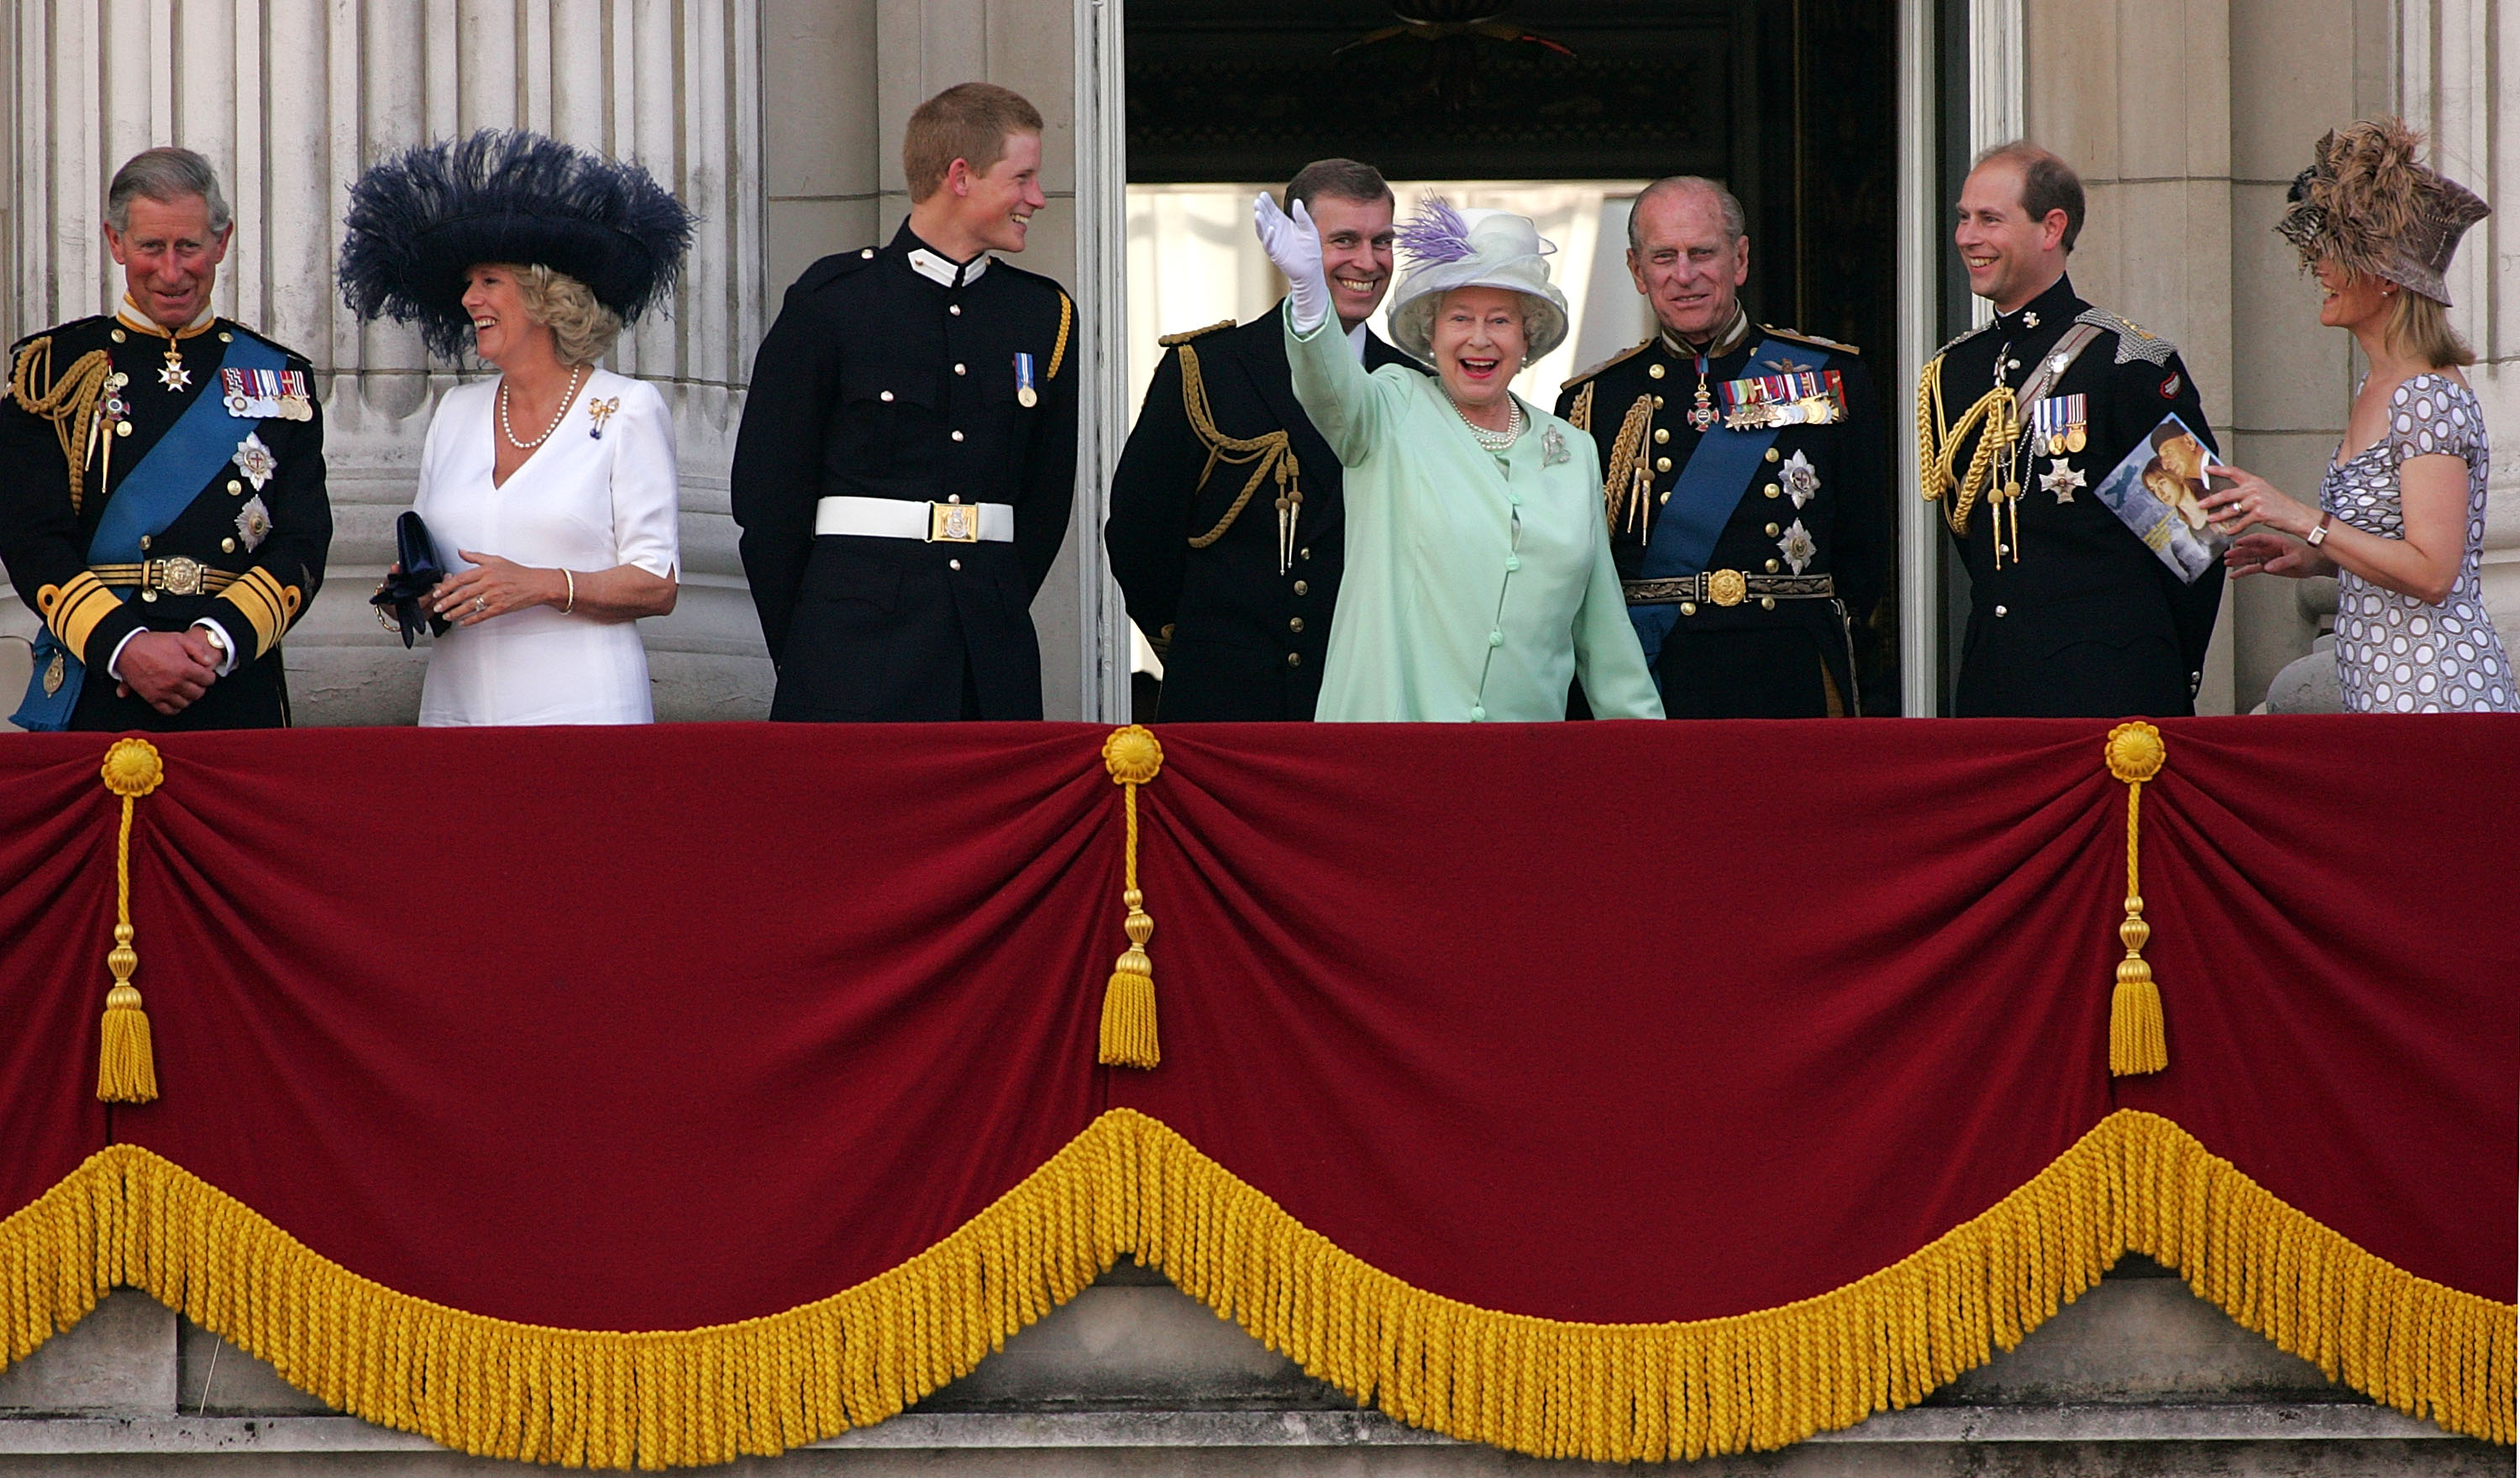 Queen Elizabeth waving as she stands on the balcony of Buckingham Palace with her sons and other royals